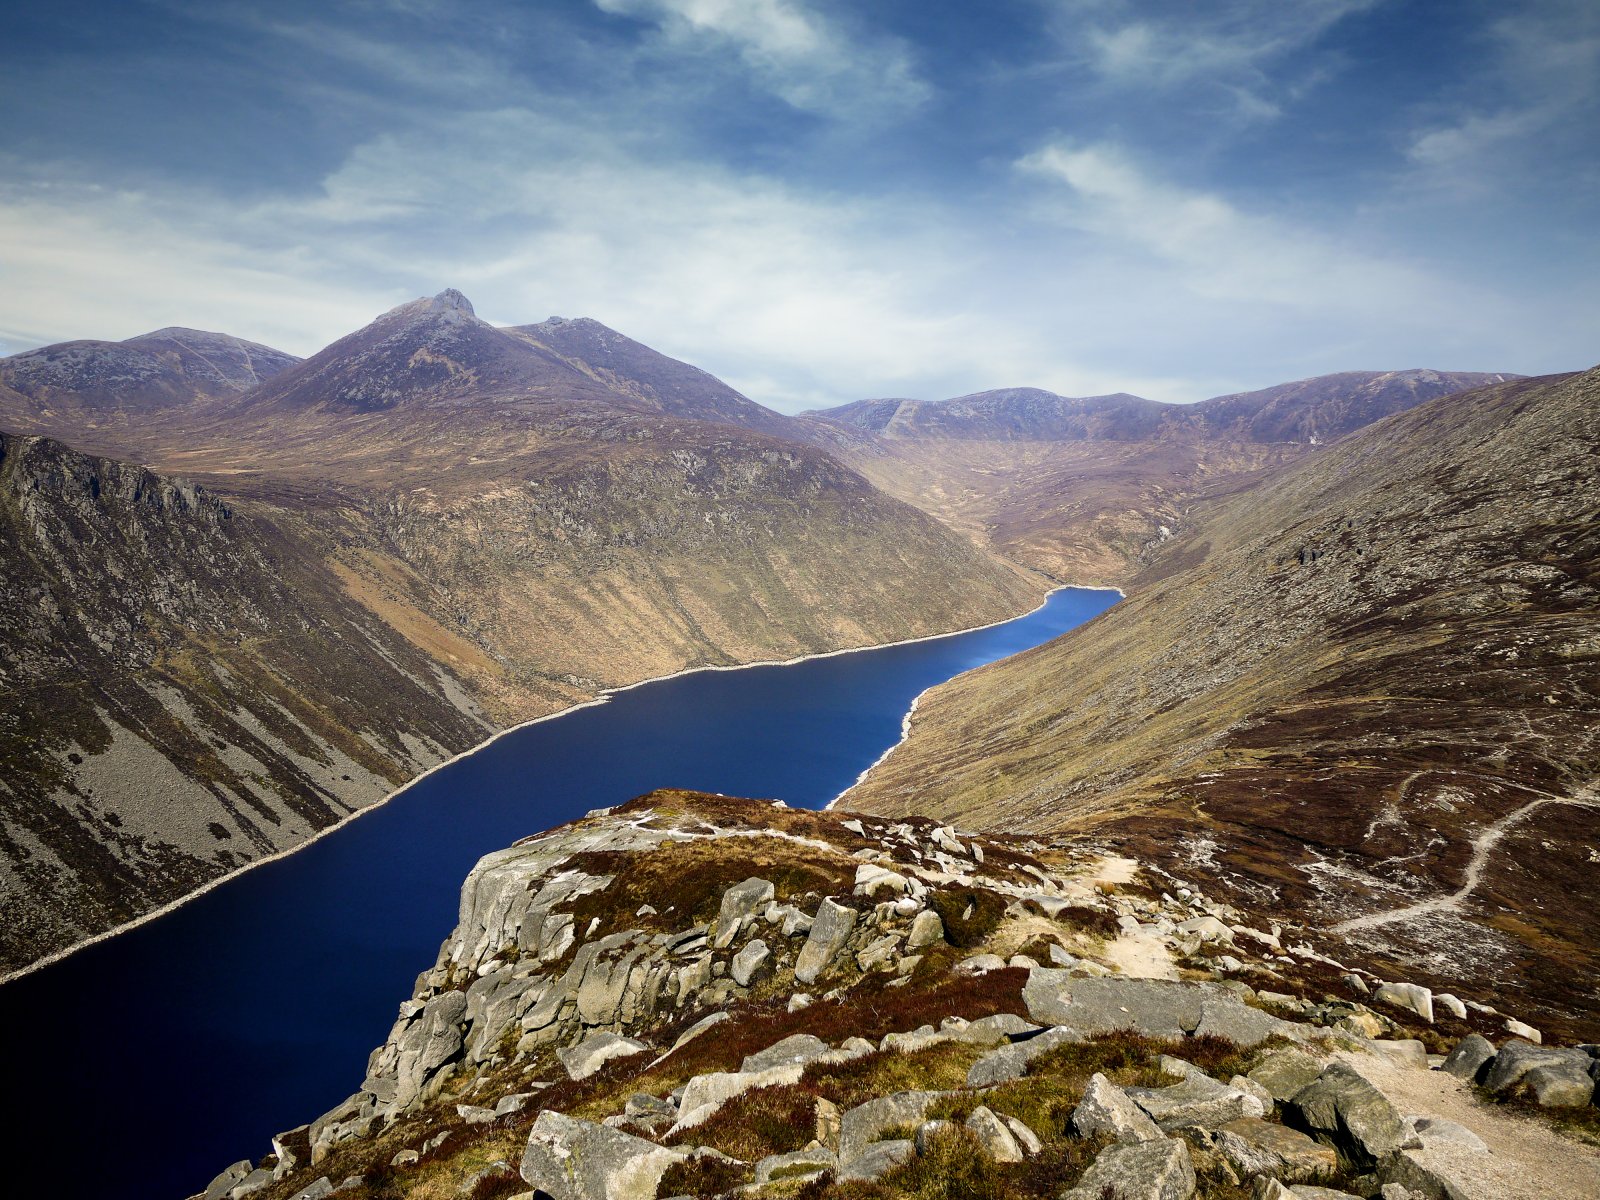 Image Credit: Shutterstock / James Kennedy NI <p>The Mourne Mountains offer some of the most breathtaking hikes in Northern Ireland. Be prepared for rapidly changing weather and bring all necessary gear for mountain safety.</p>